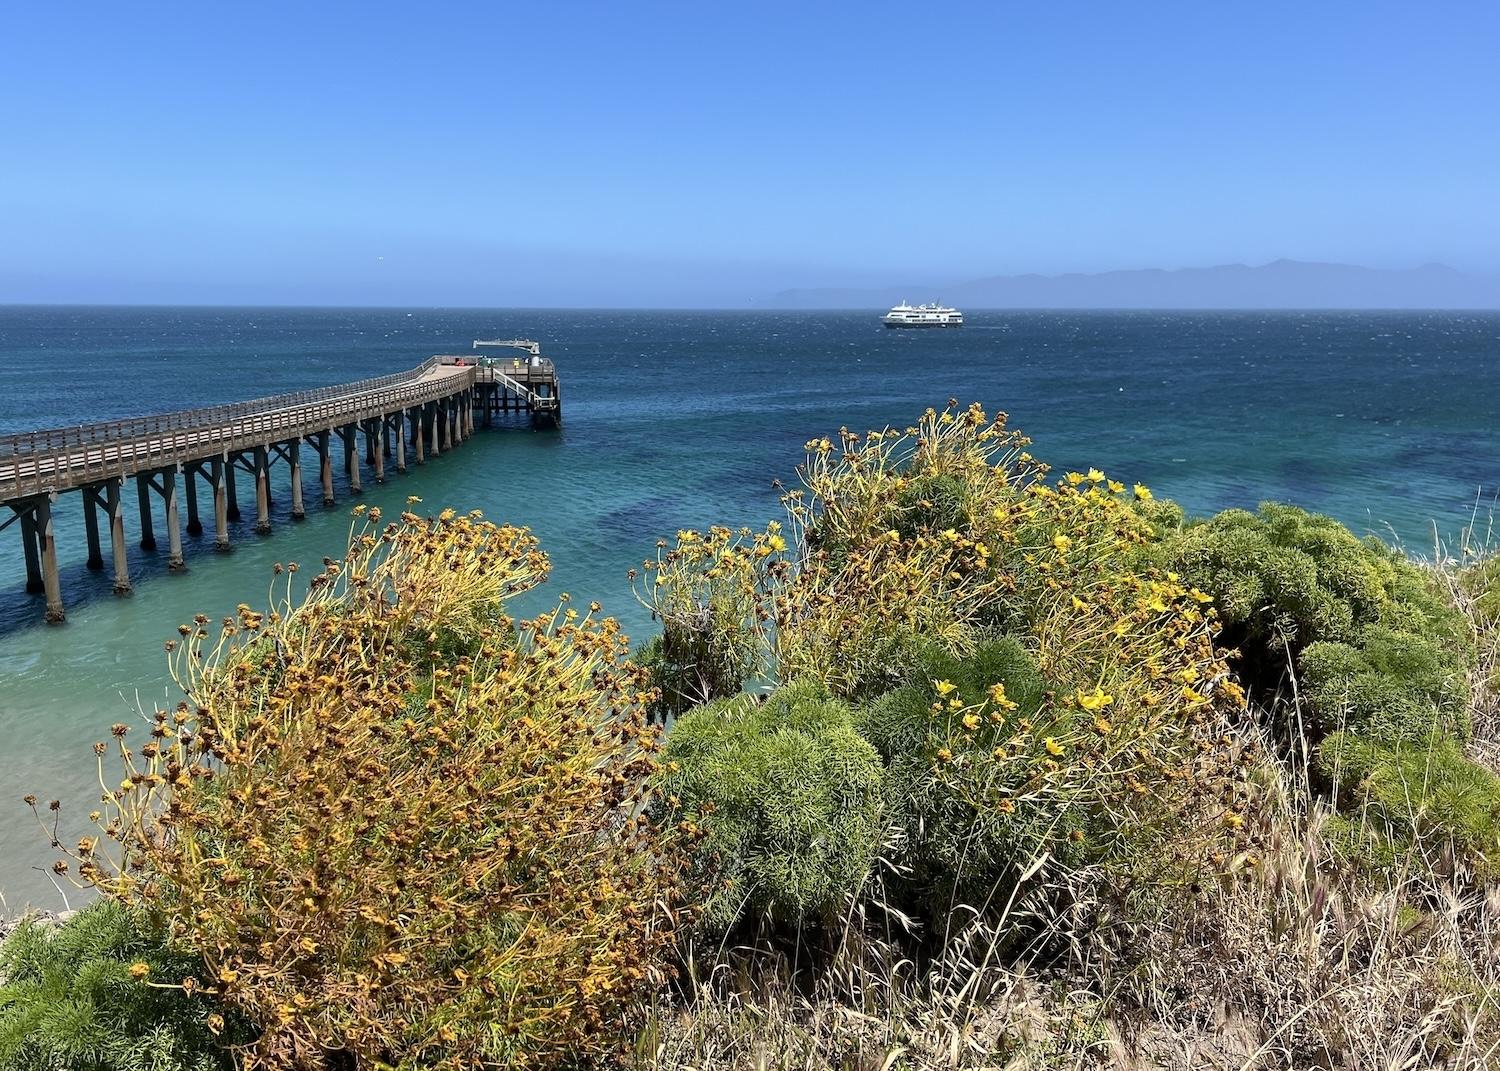 Lindblad's National Geographic Quest anchors off Santa Rosa Island, part of Channel Islands National Park.